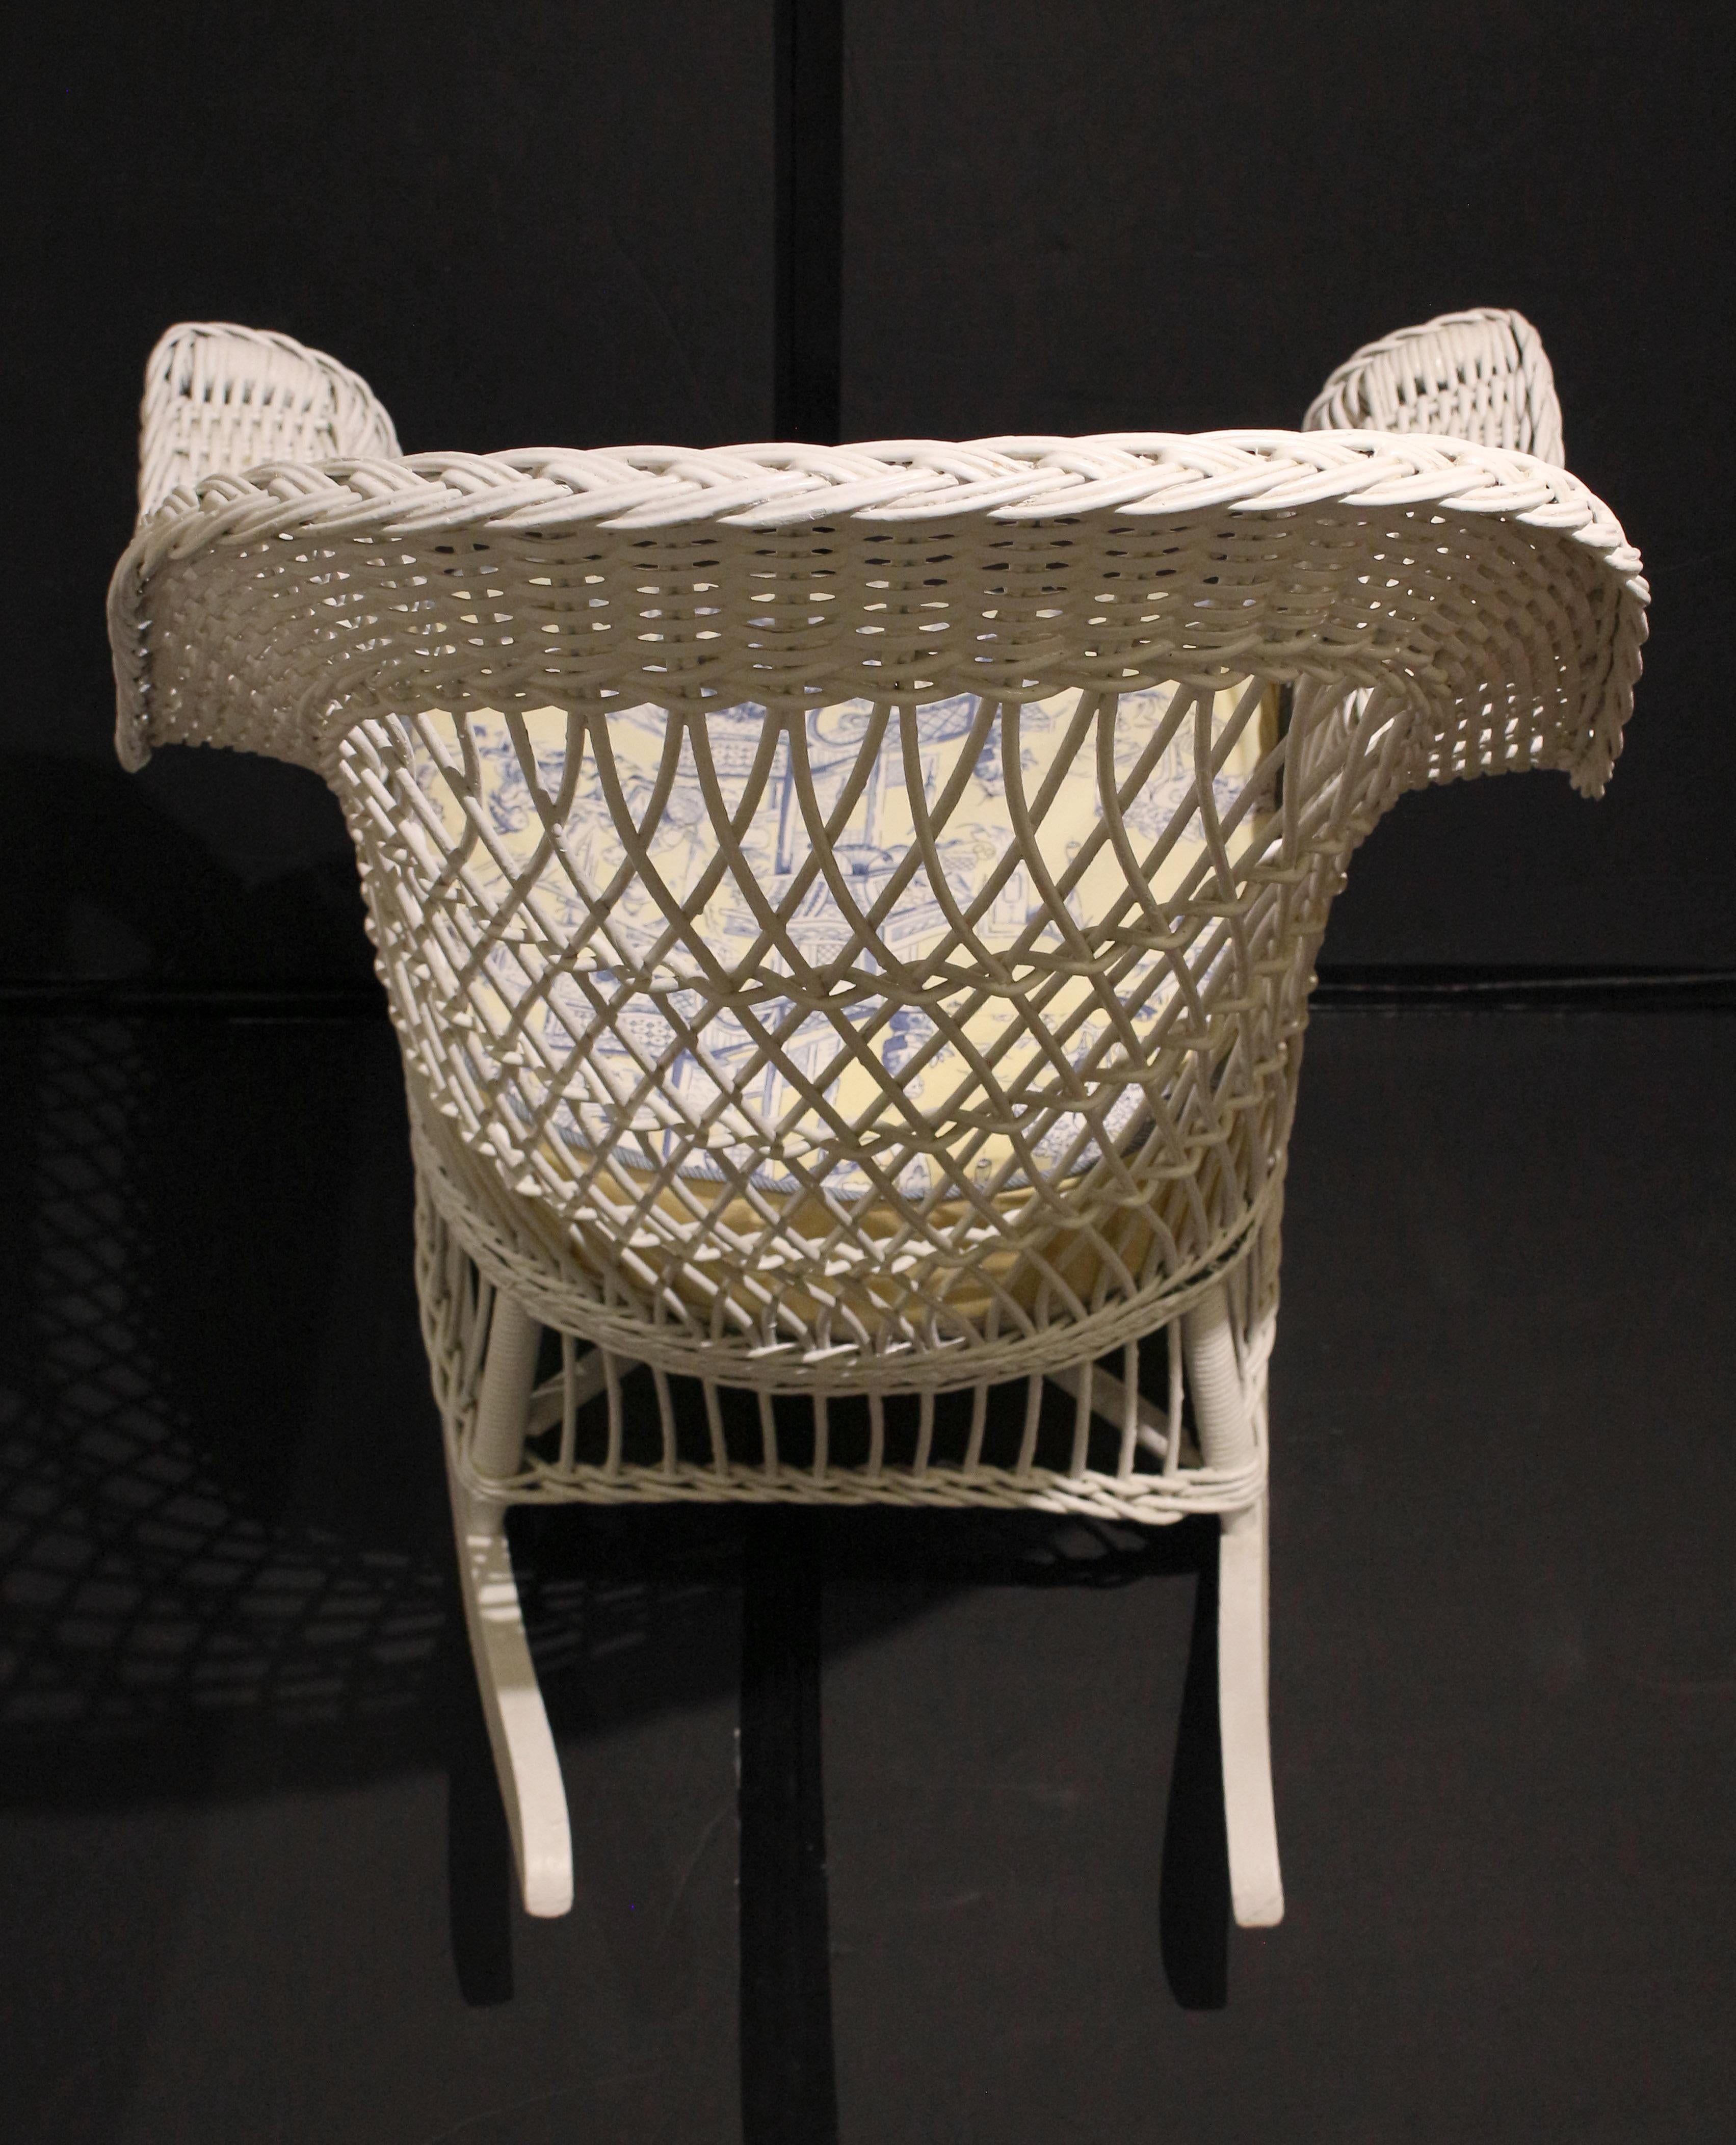 Early 20th Century Heywood-Wakefield Bar Harbor Wicker Rocking Chair In Good Condition For Sale In Chapel Hill, NC